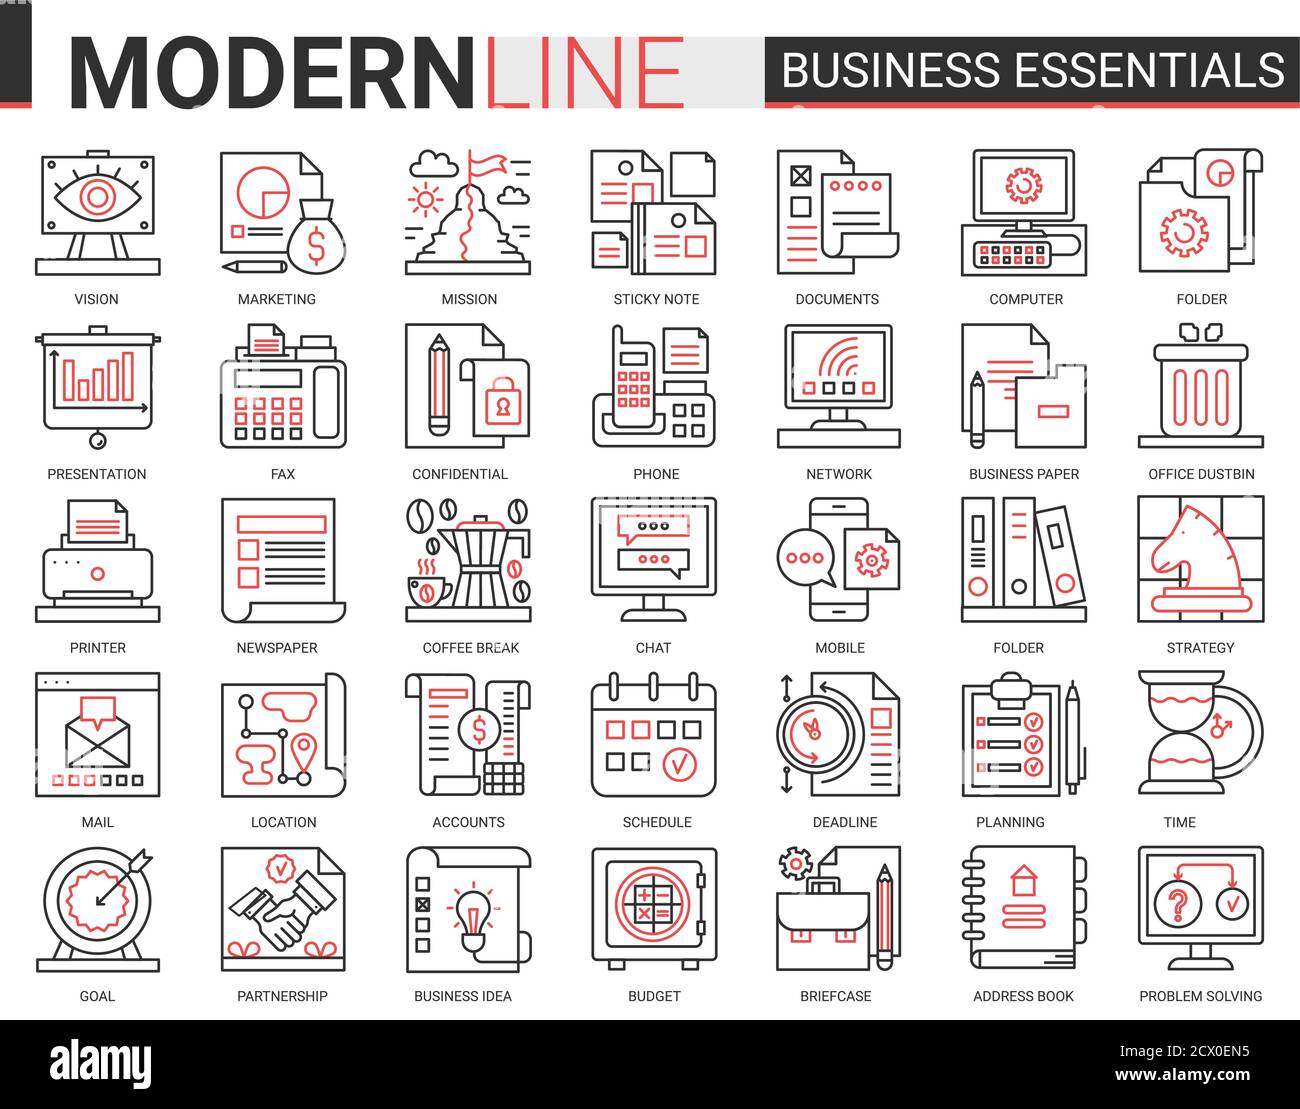 Business complex concept thin red black line icon vector set. Business essential website outline pictogram symbols collection with office objects, equipment documents for financial development Stock Vector